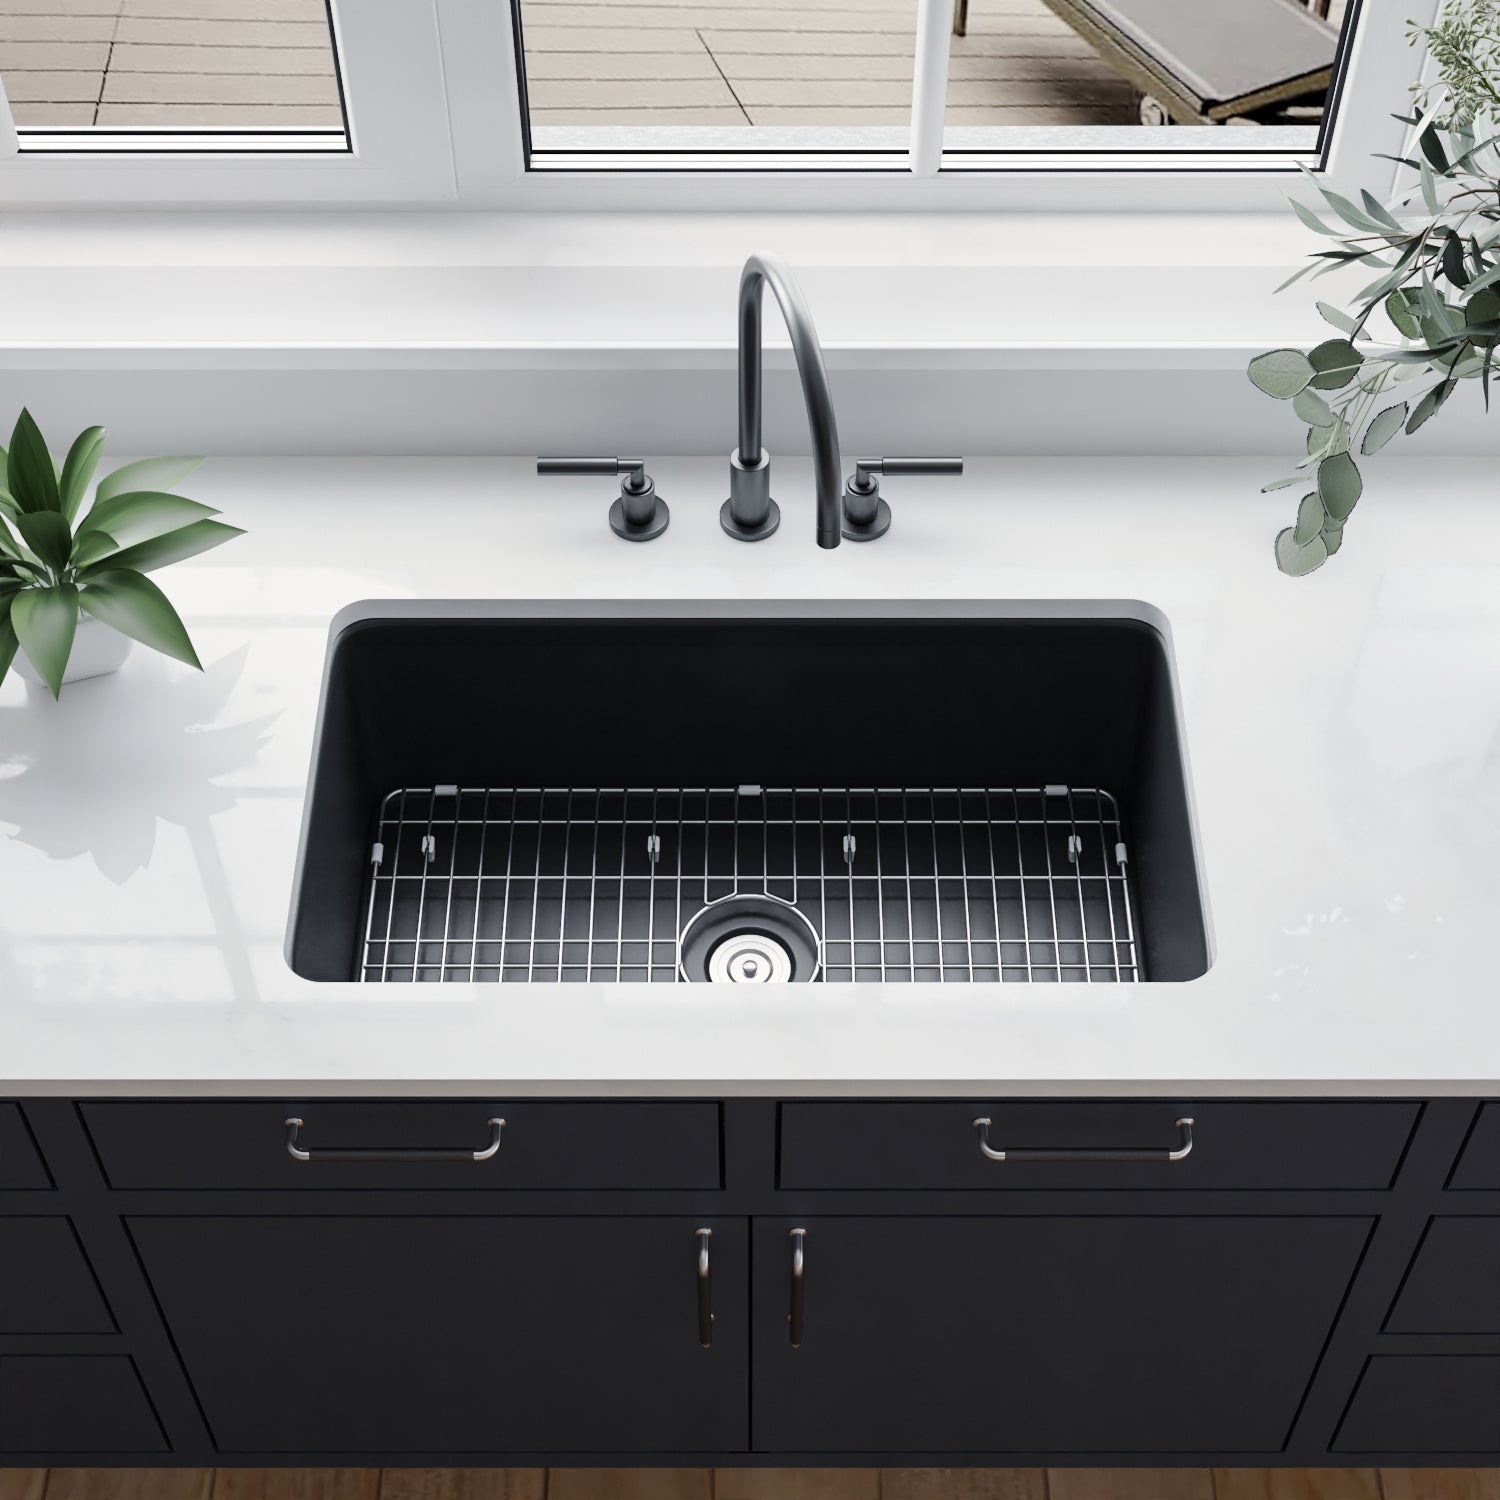 DeerValley Glen 32" L x 19" W DV-1K0016 Rectangle Black Fireclay Easy-Cleaning Undermount or Topmount Farmhouse Kitchen Sink With Basket Strainer Drain and Grid